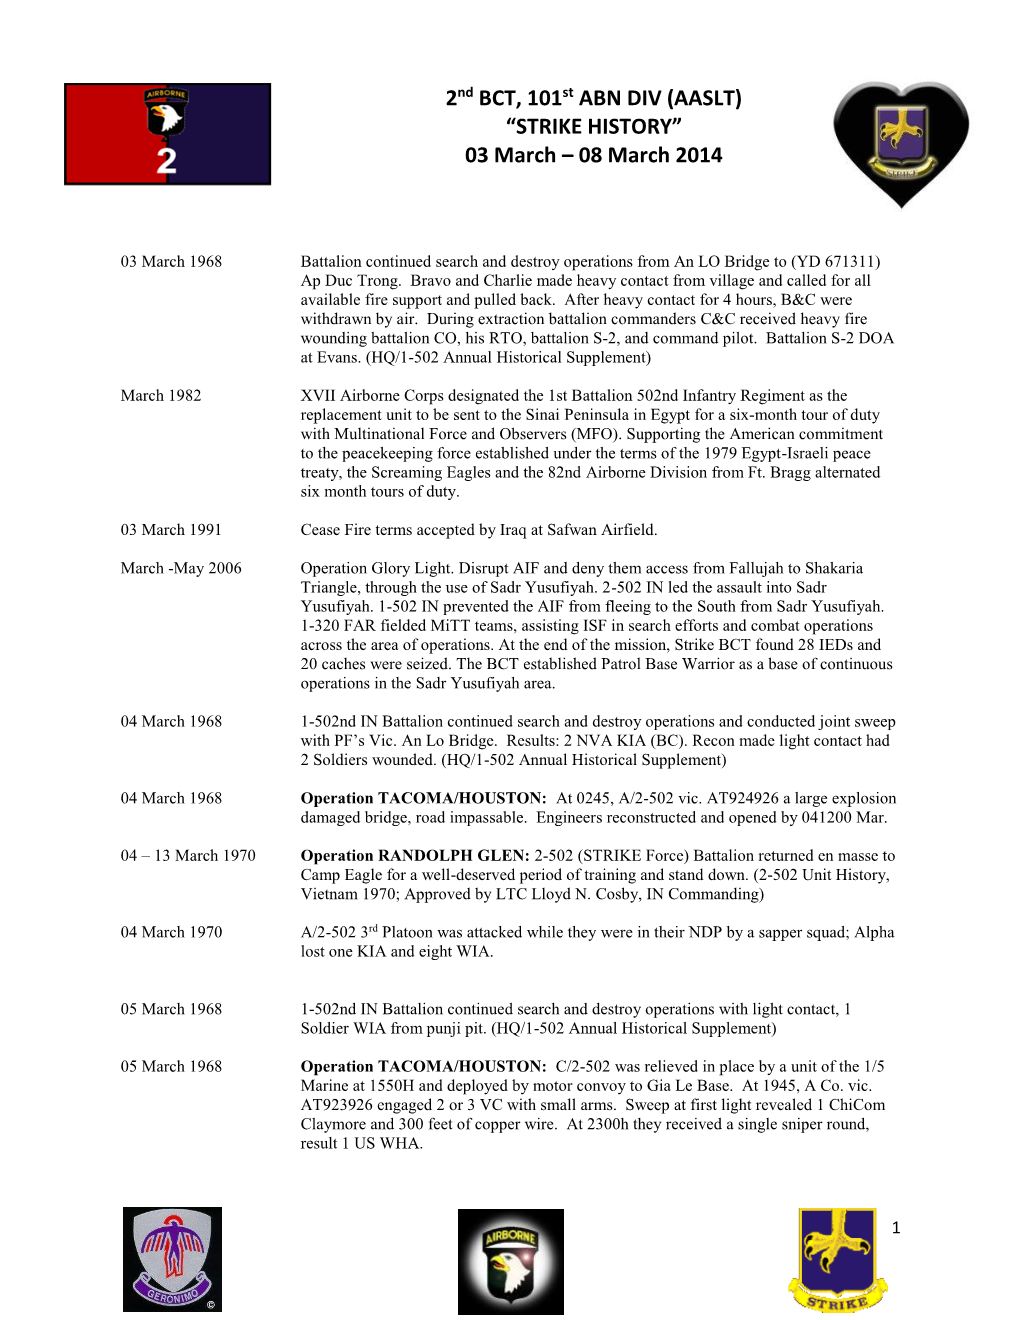 2Nd BCT, 101St ABN DIV (AASLT) “STRIKE HISTORY” 03 March – 08 March 2014